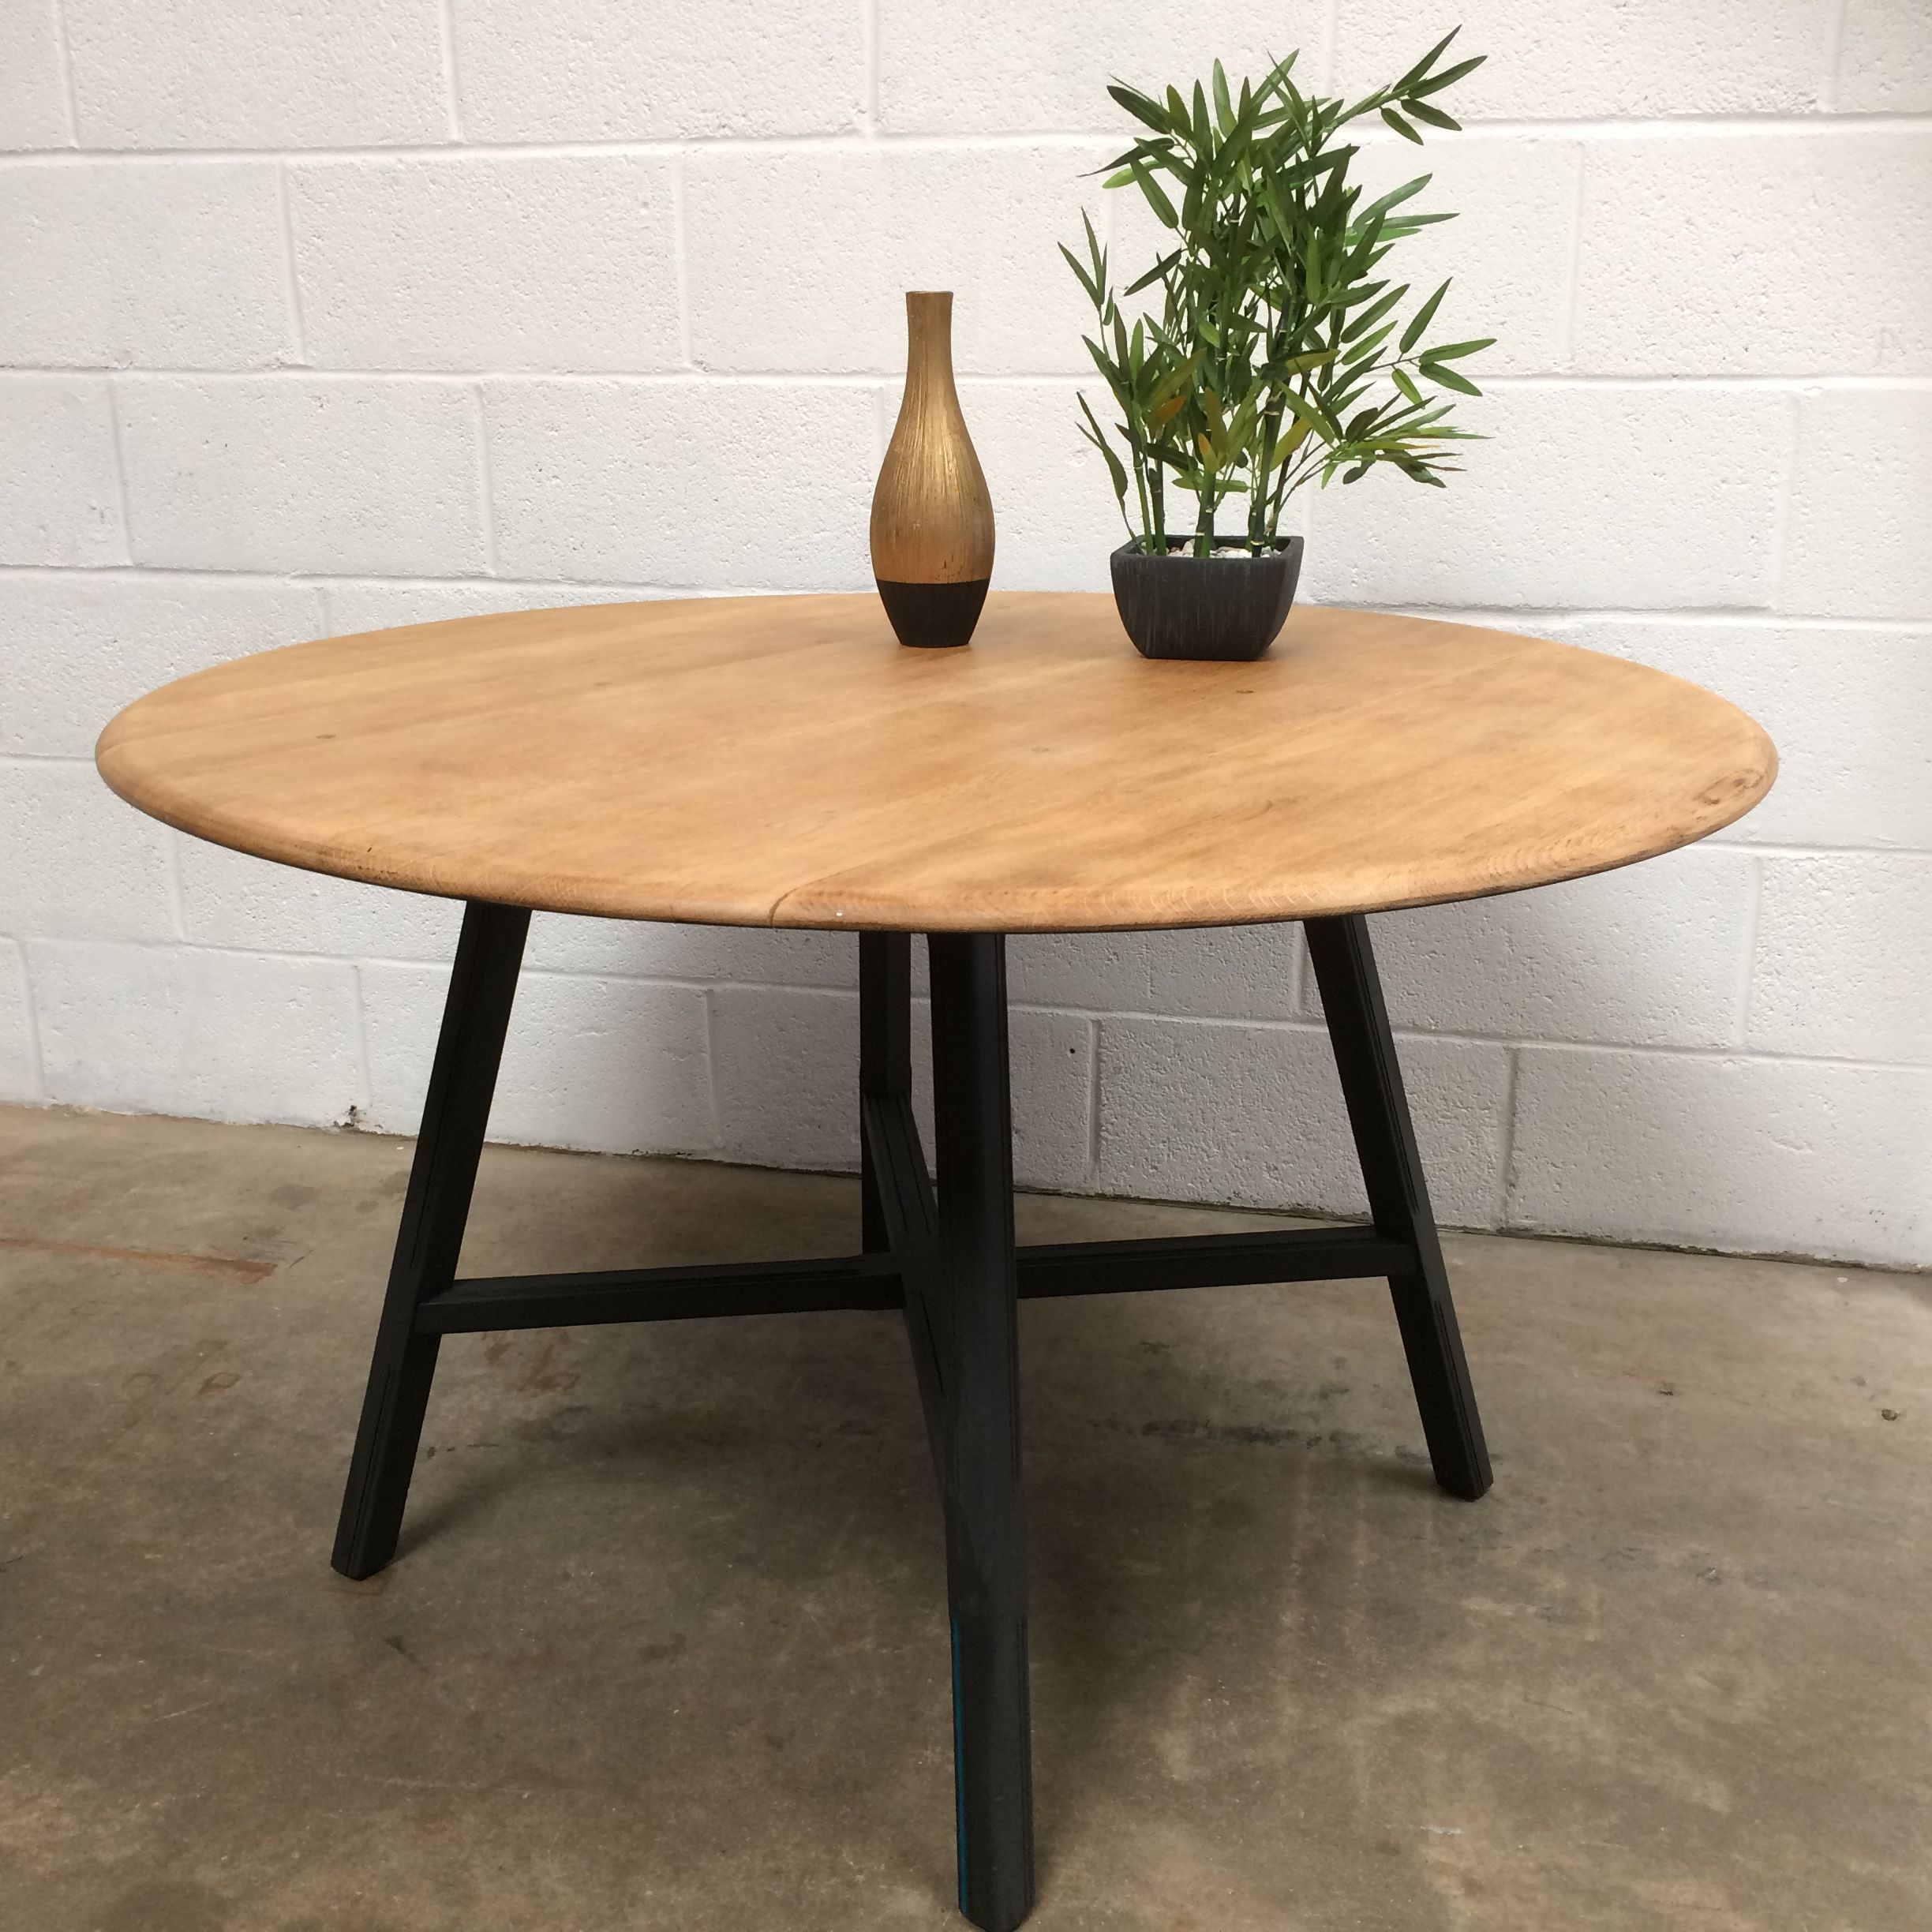 Most Recent Drop Leaf Tables With Hairpin Legs Throughout Upcycled Ercol Drop Leaf Table (View 5 of 20)